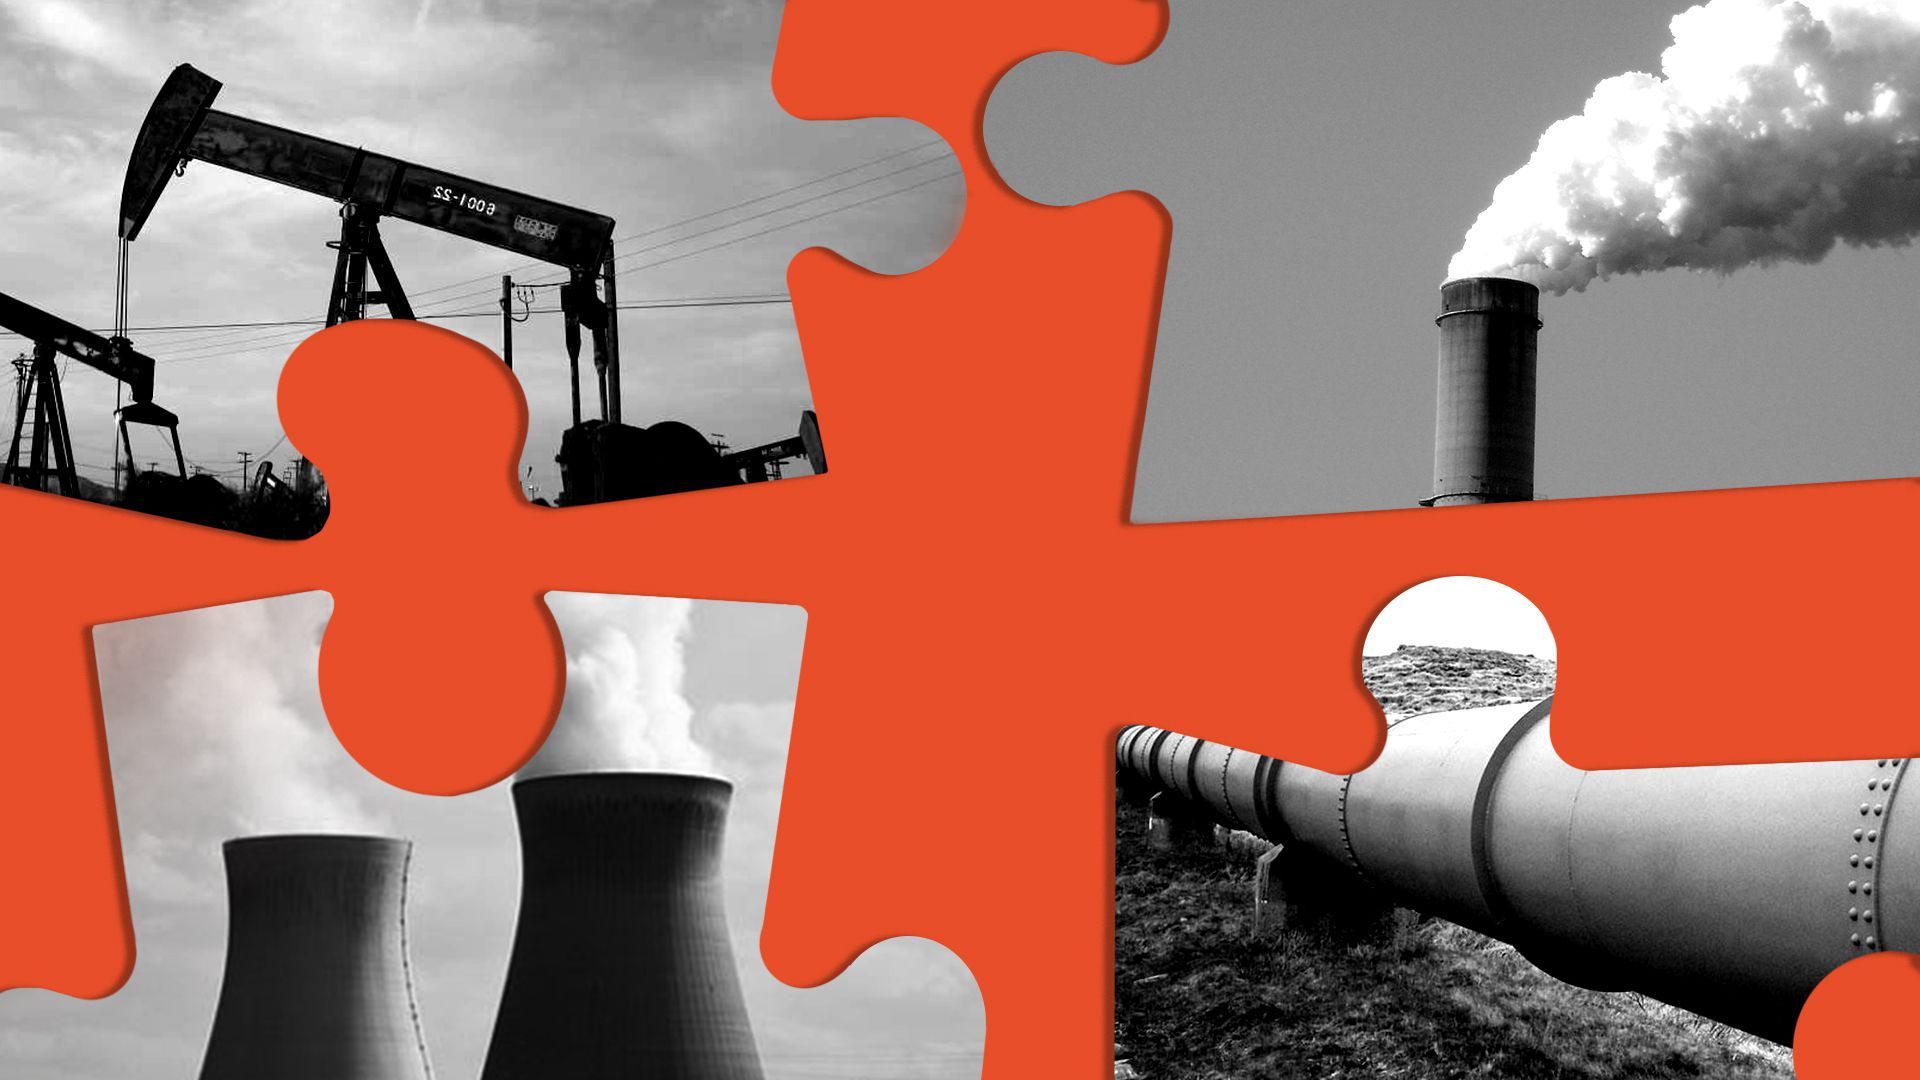 In this illustration, a puzzle piece with a nuclear reactor, a puzzle piece with oil fields, and other energy puzzle pieces are scattered on a red background.